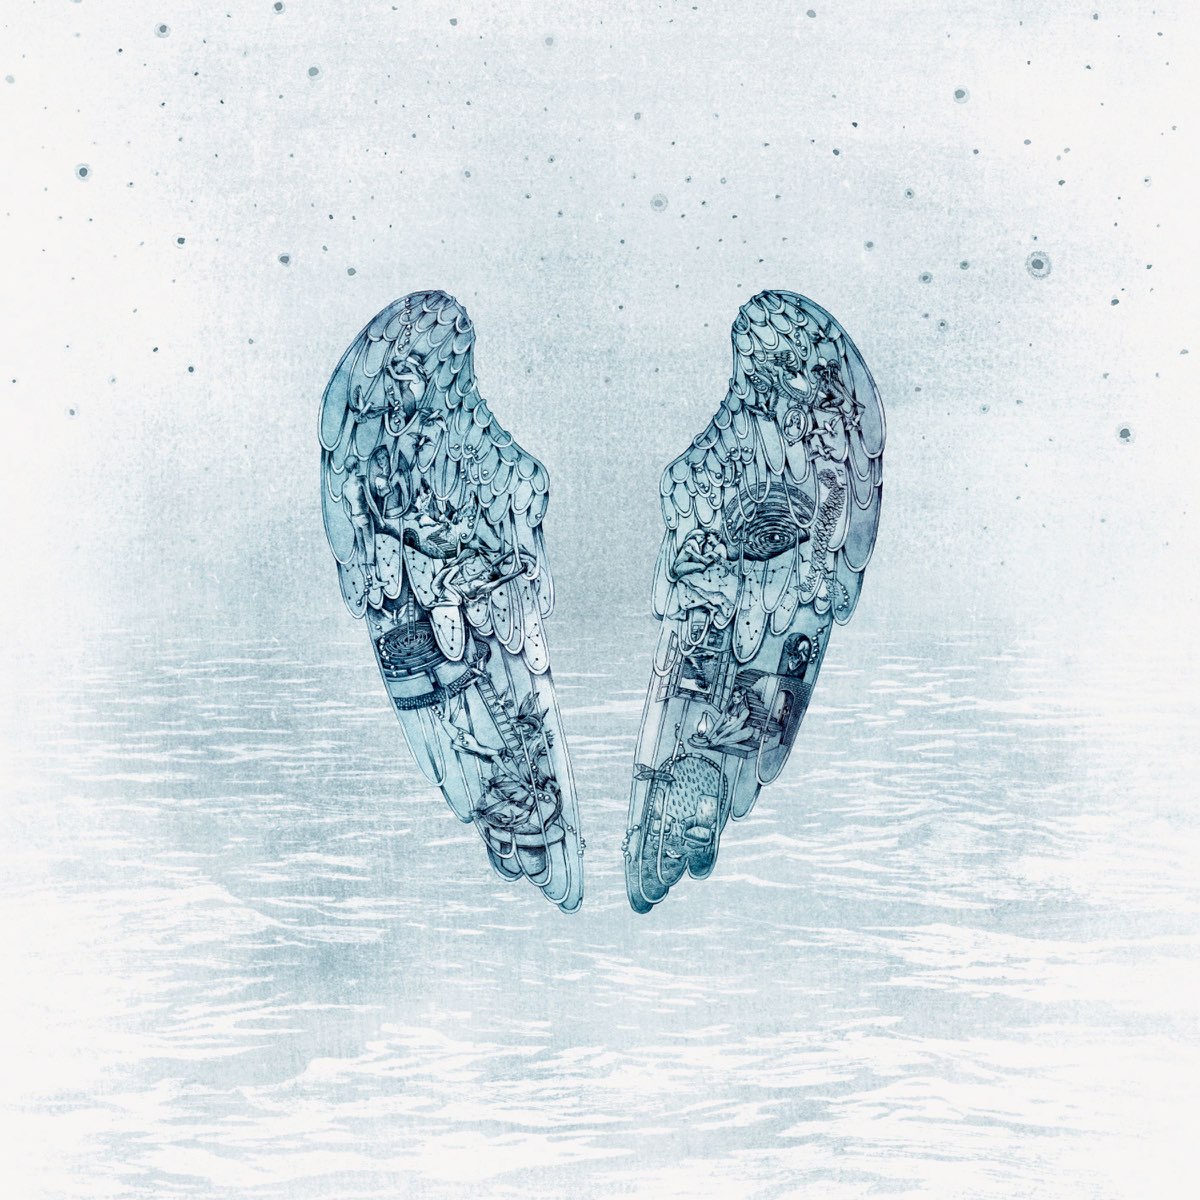 Coldplay Ghost stories album. Coldplay. Ghost stories Live (2014). Coldplay обложки альбомов. Coldplay Ghost stories обложка. Красивый альбом песен